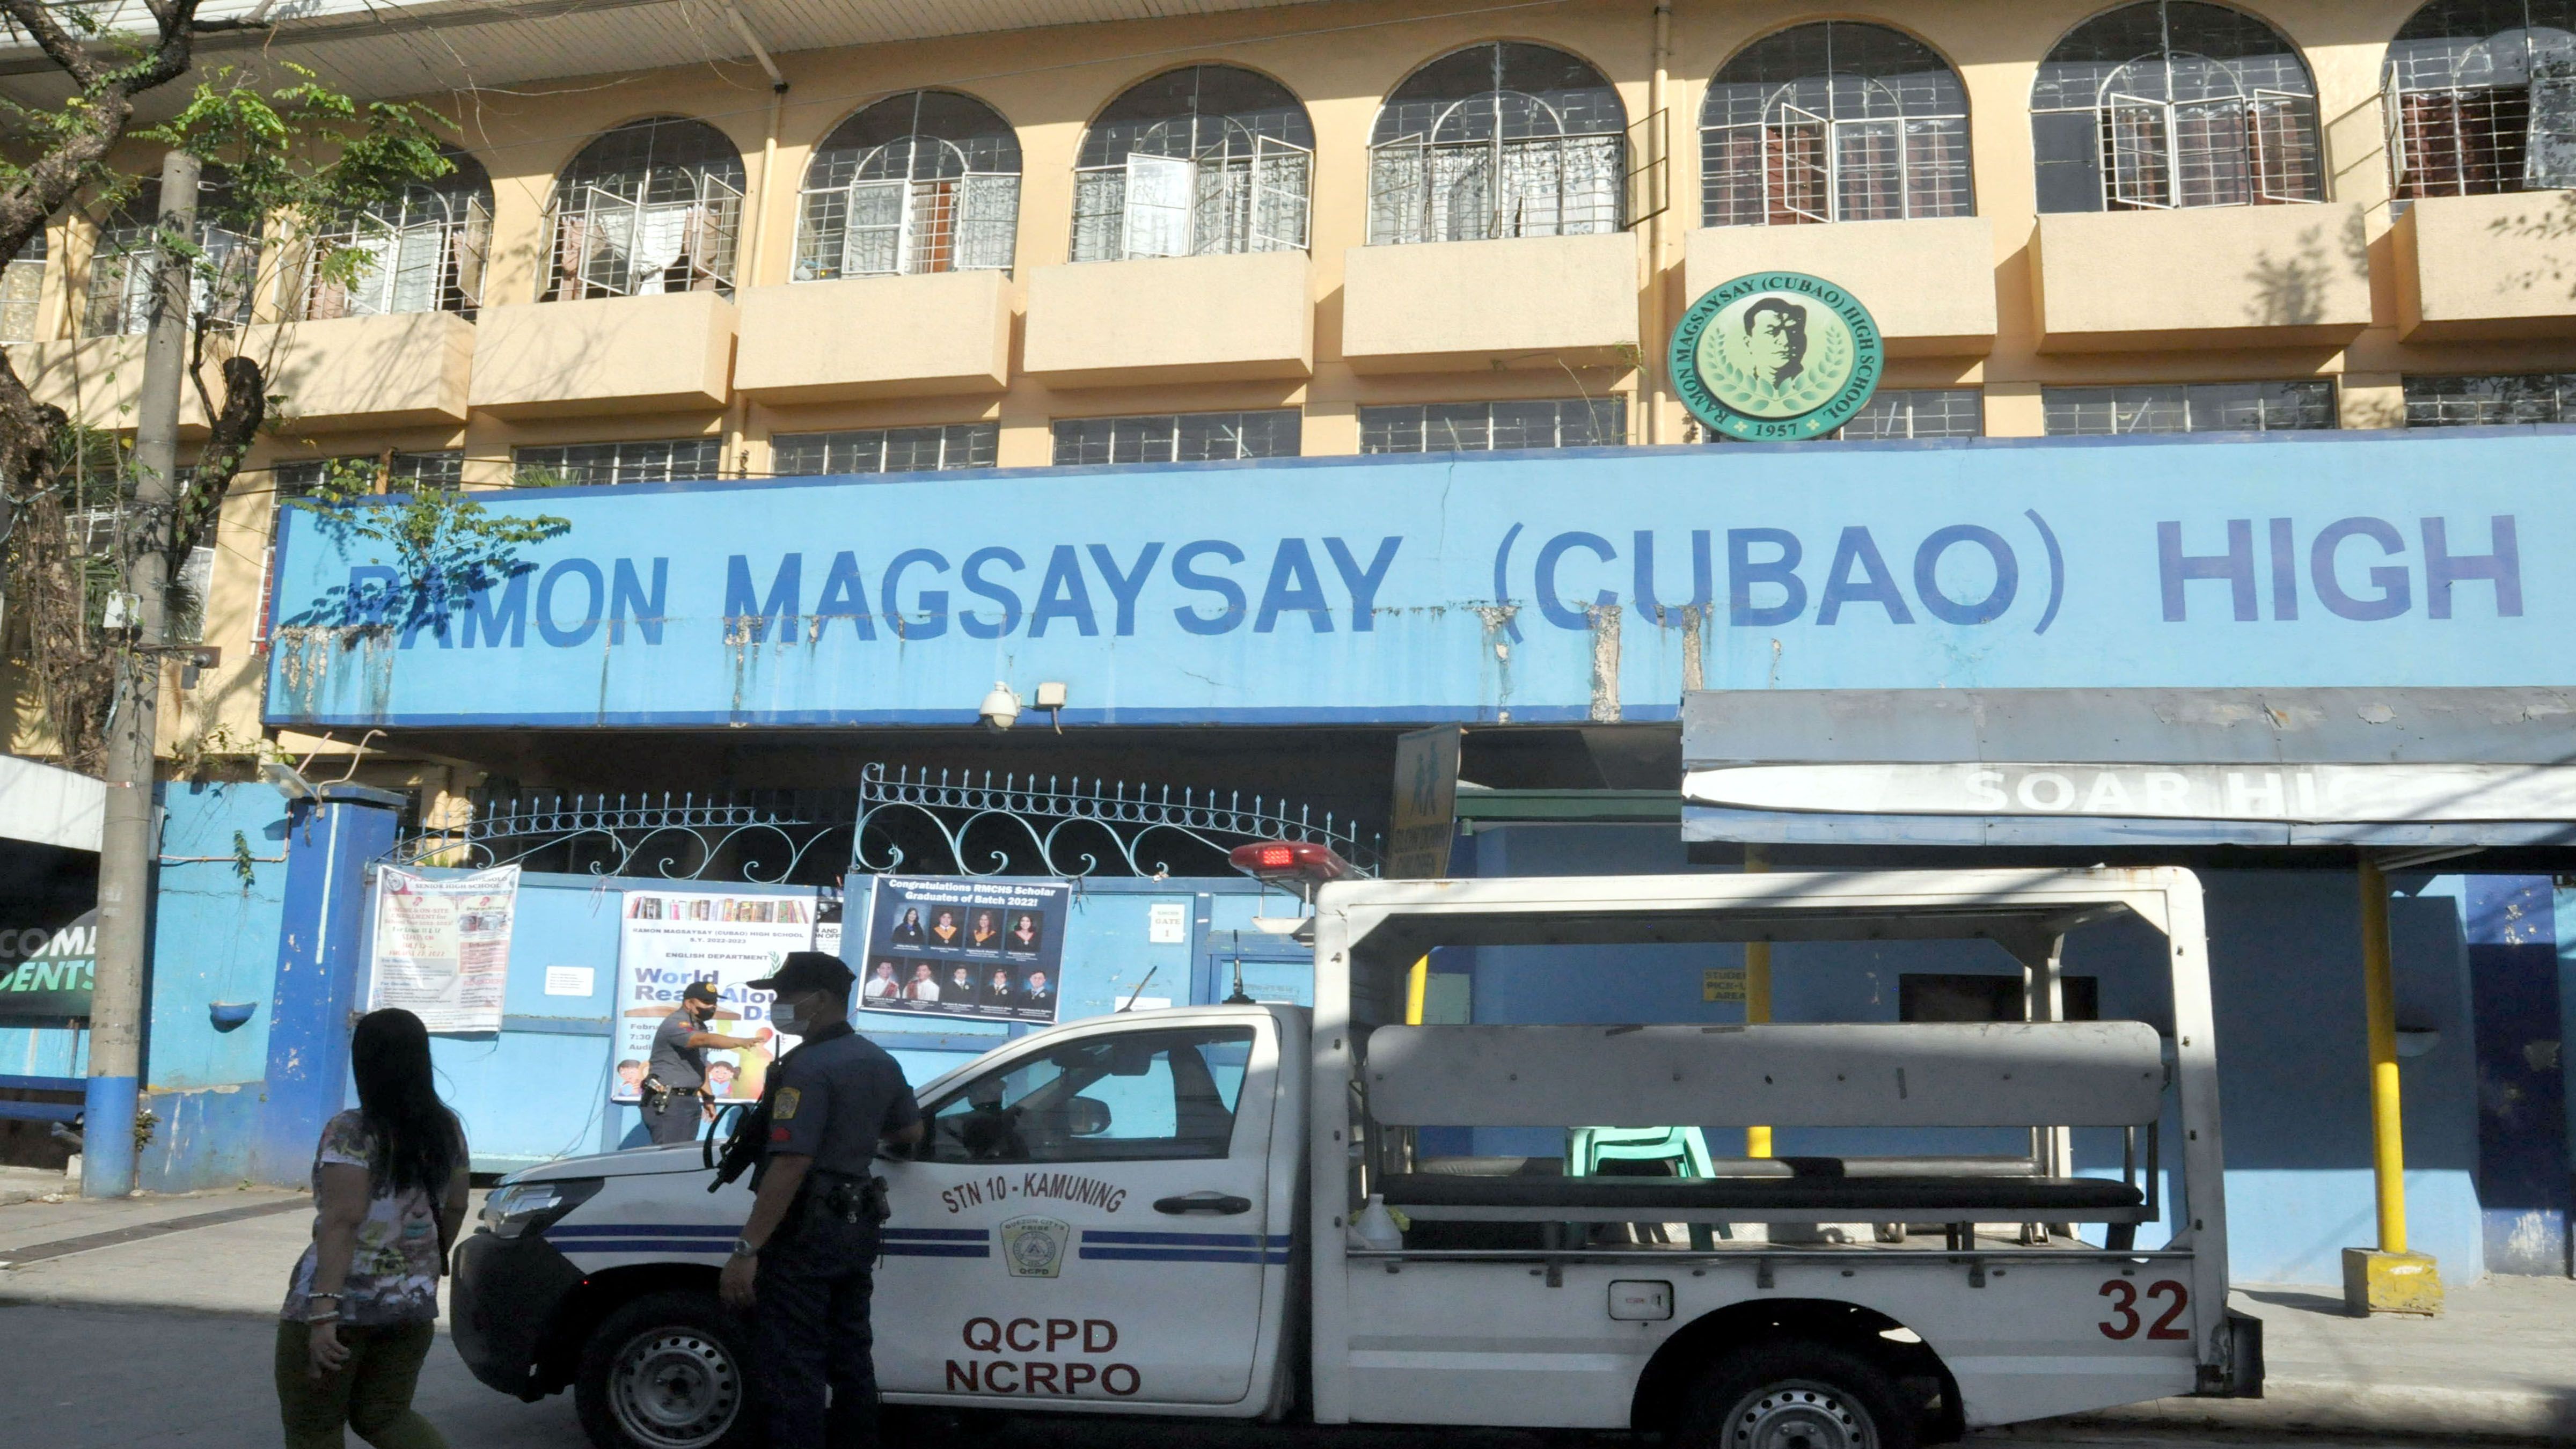 QCPD PROVIDE SECURITY TO PUBLIC SCHOOLS